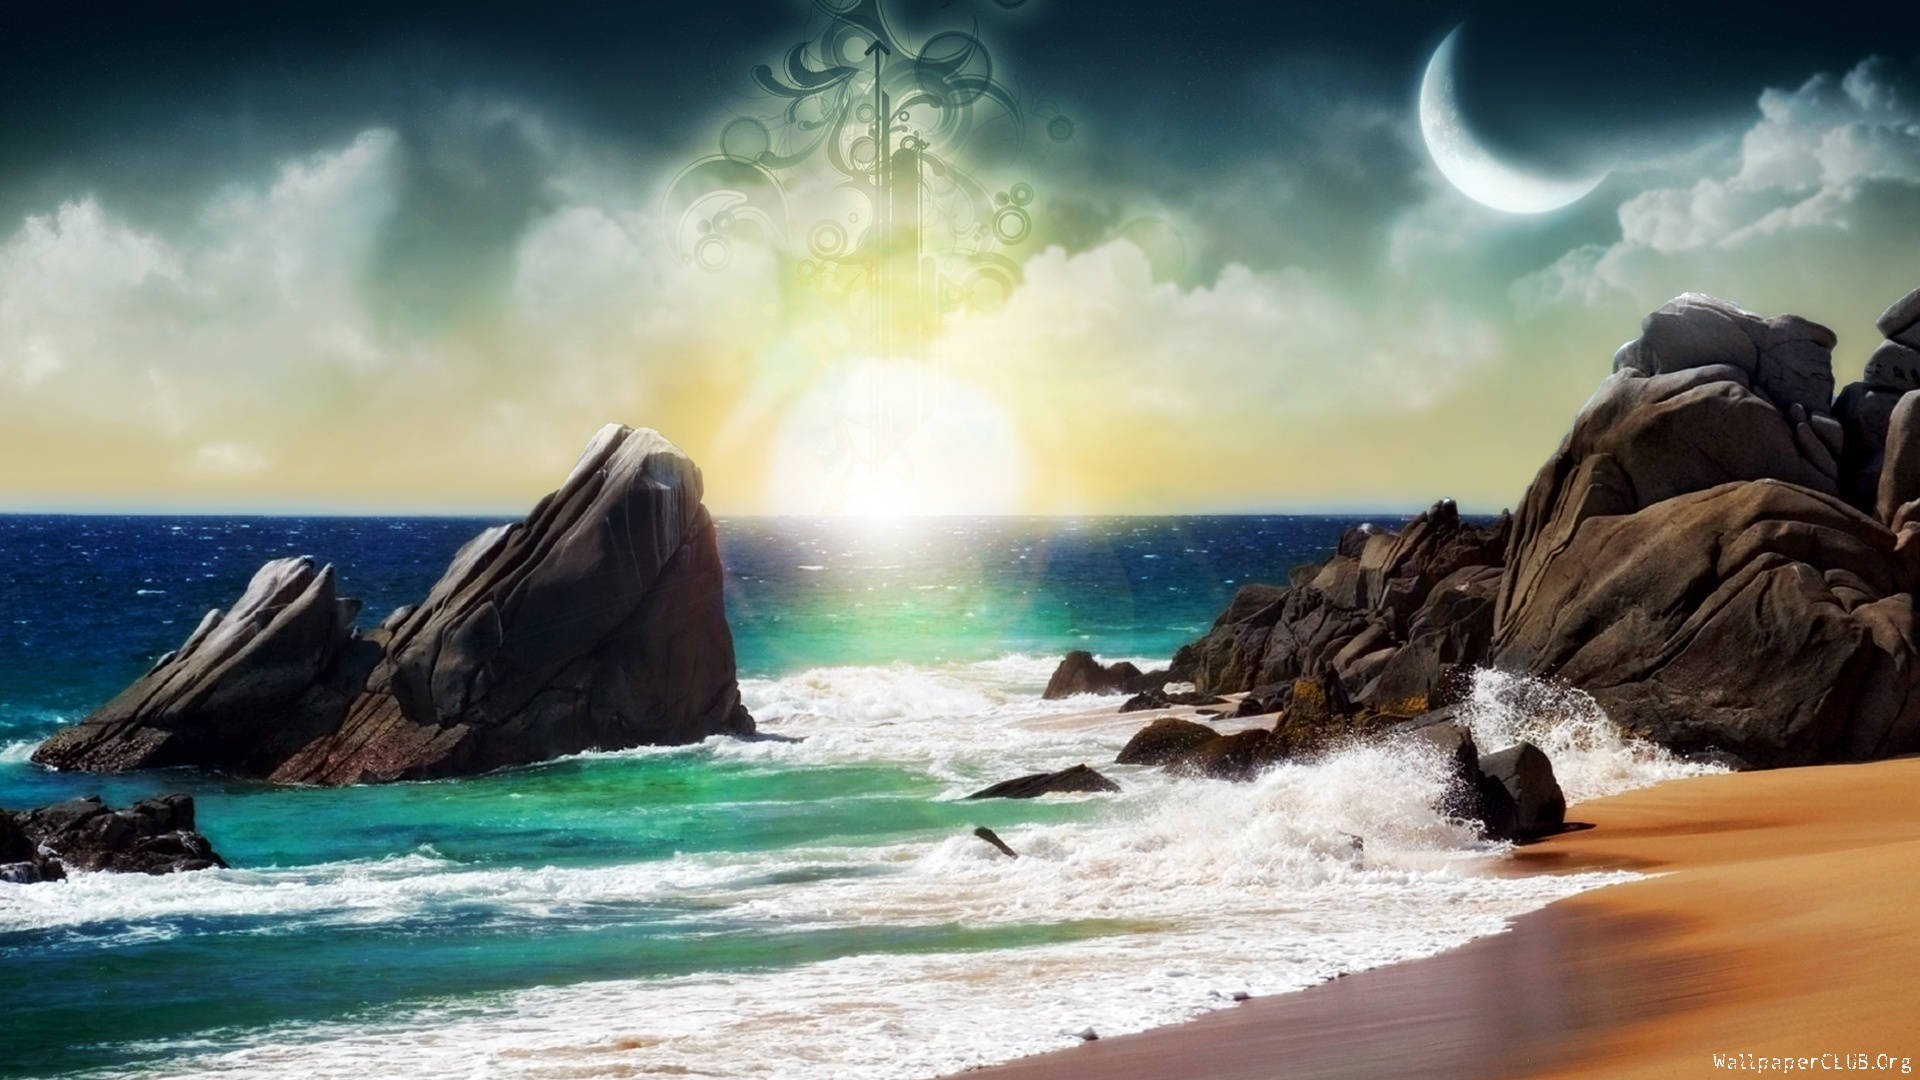 Download Fantasy Islands Shore With Waves Wallpaper